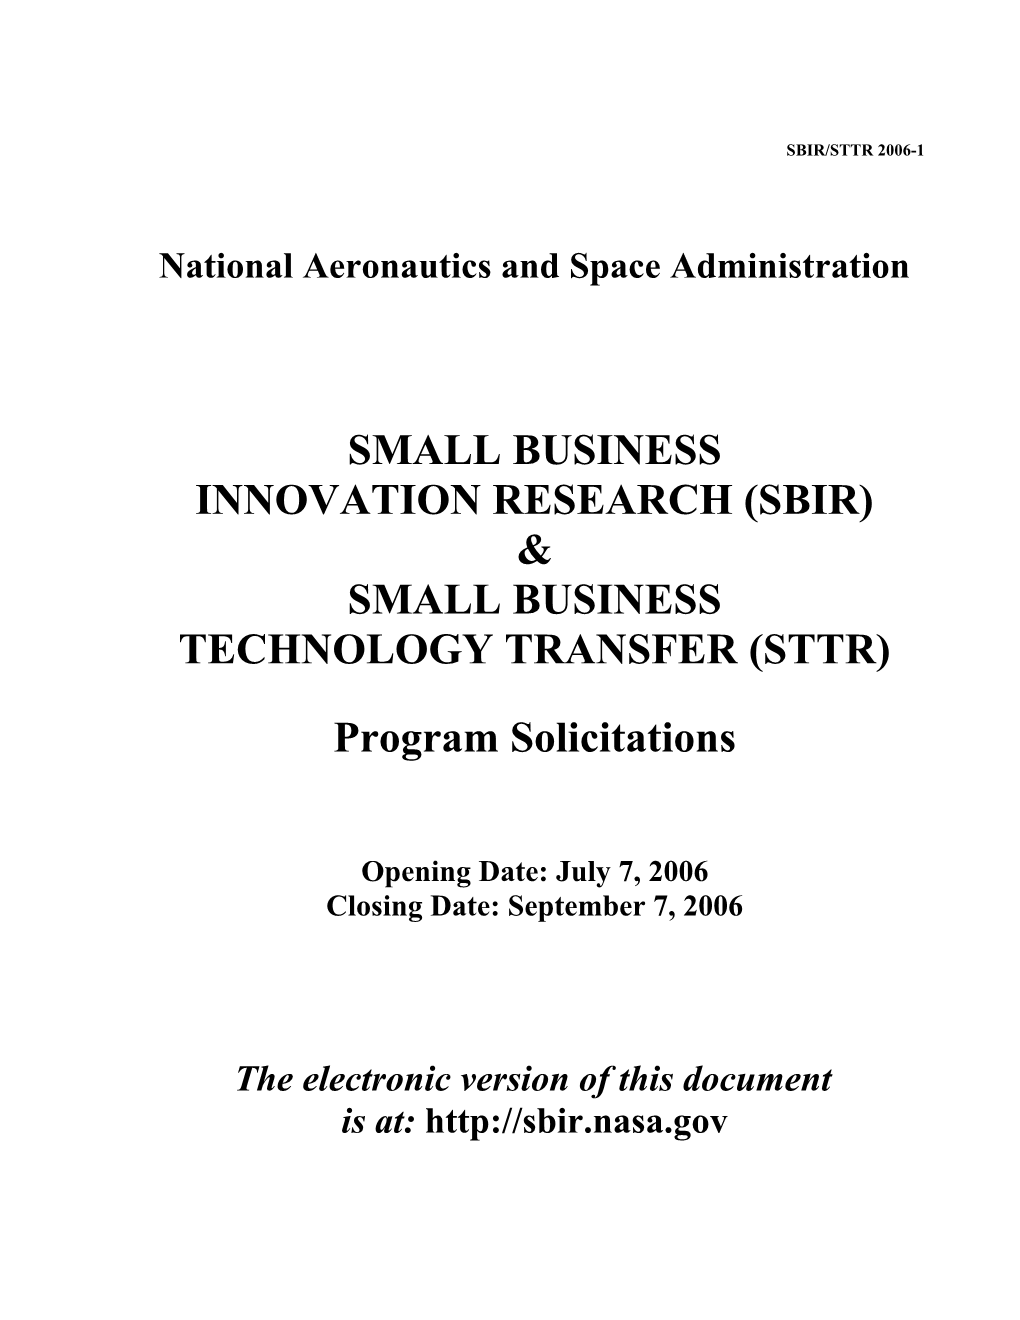 2000 NASA Small Business Innovation Research Program Solicitation s1